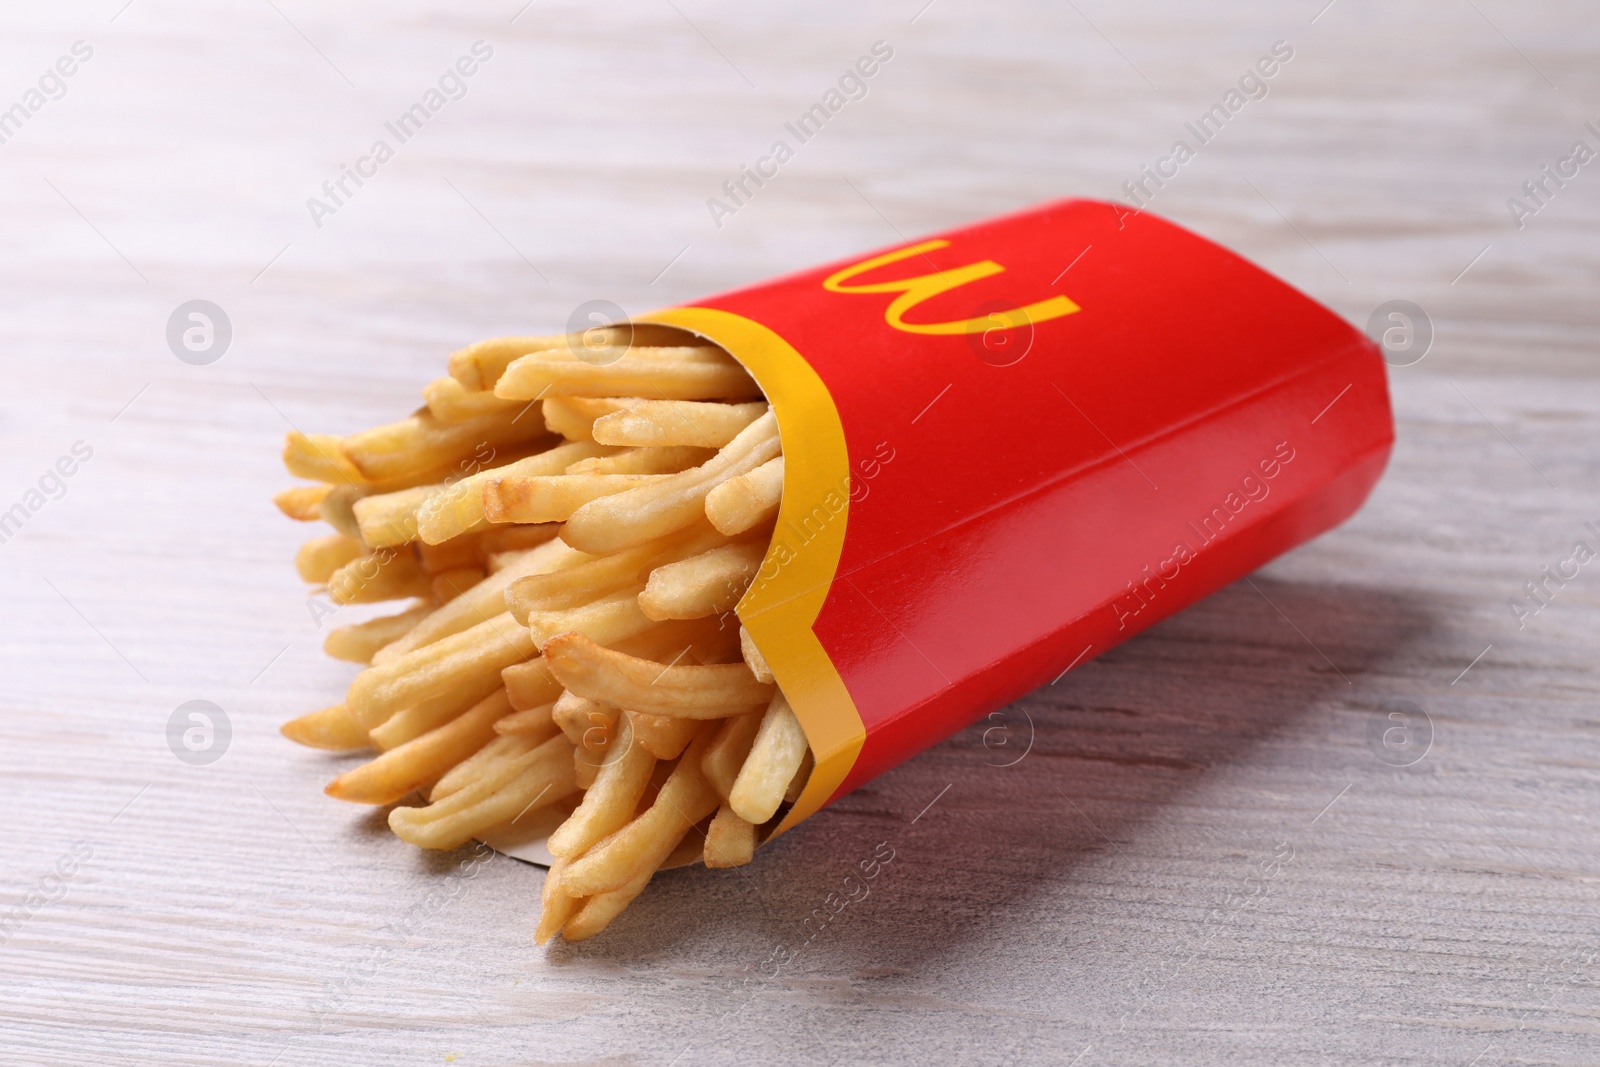 Photo of MYKOLAIV, UKRAINE - AUGUST 12, 2021: Big portion of McDonald's French fries on white wooden table